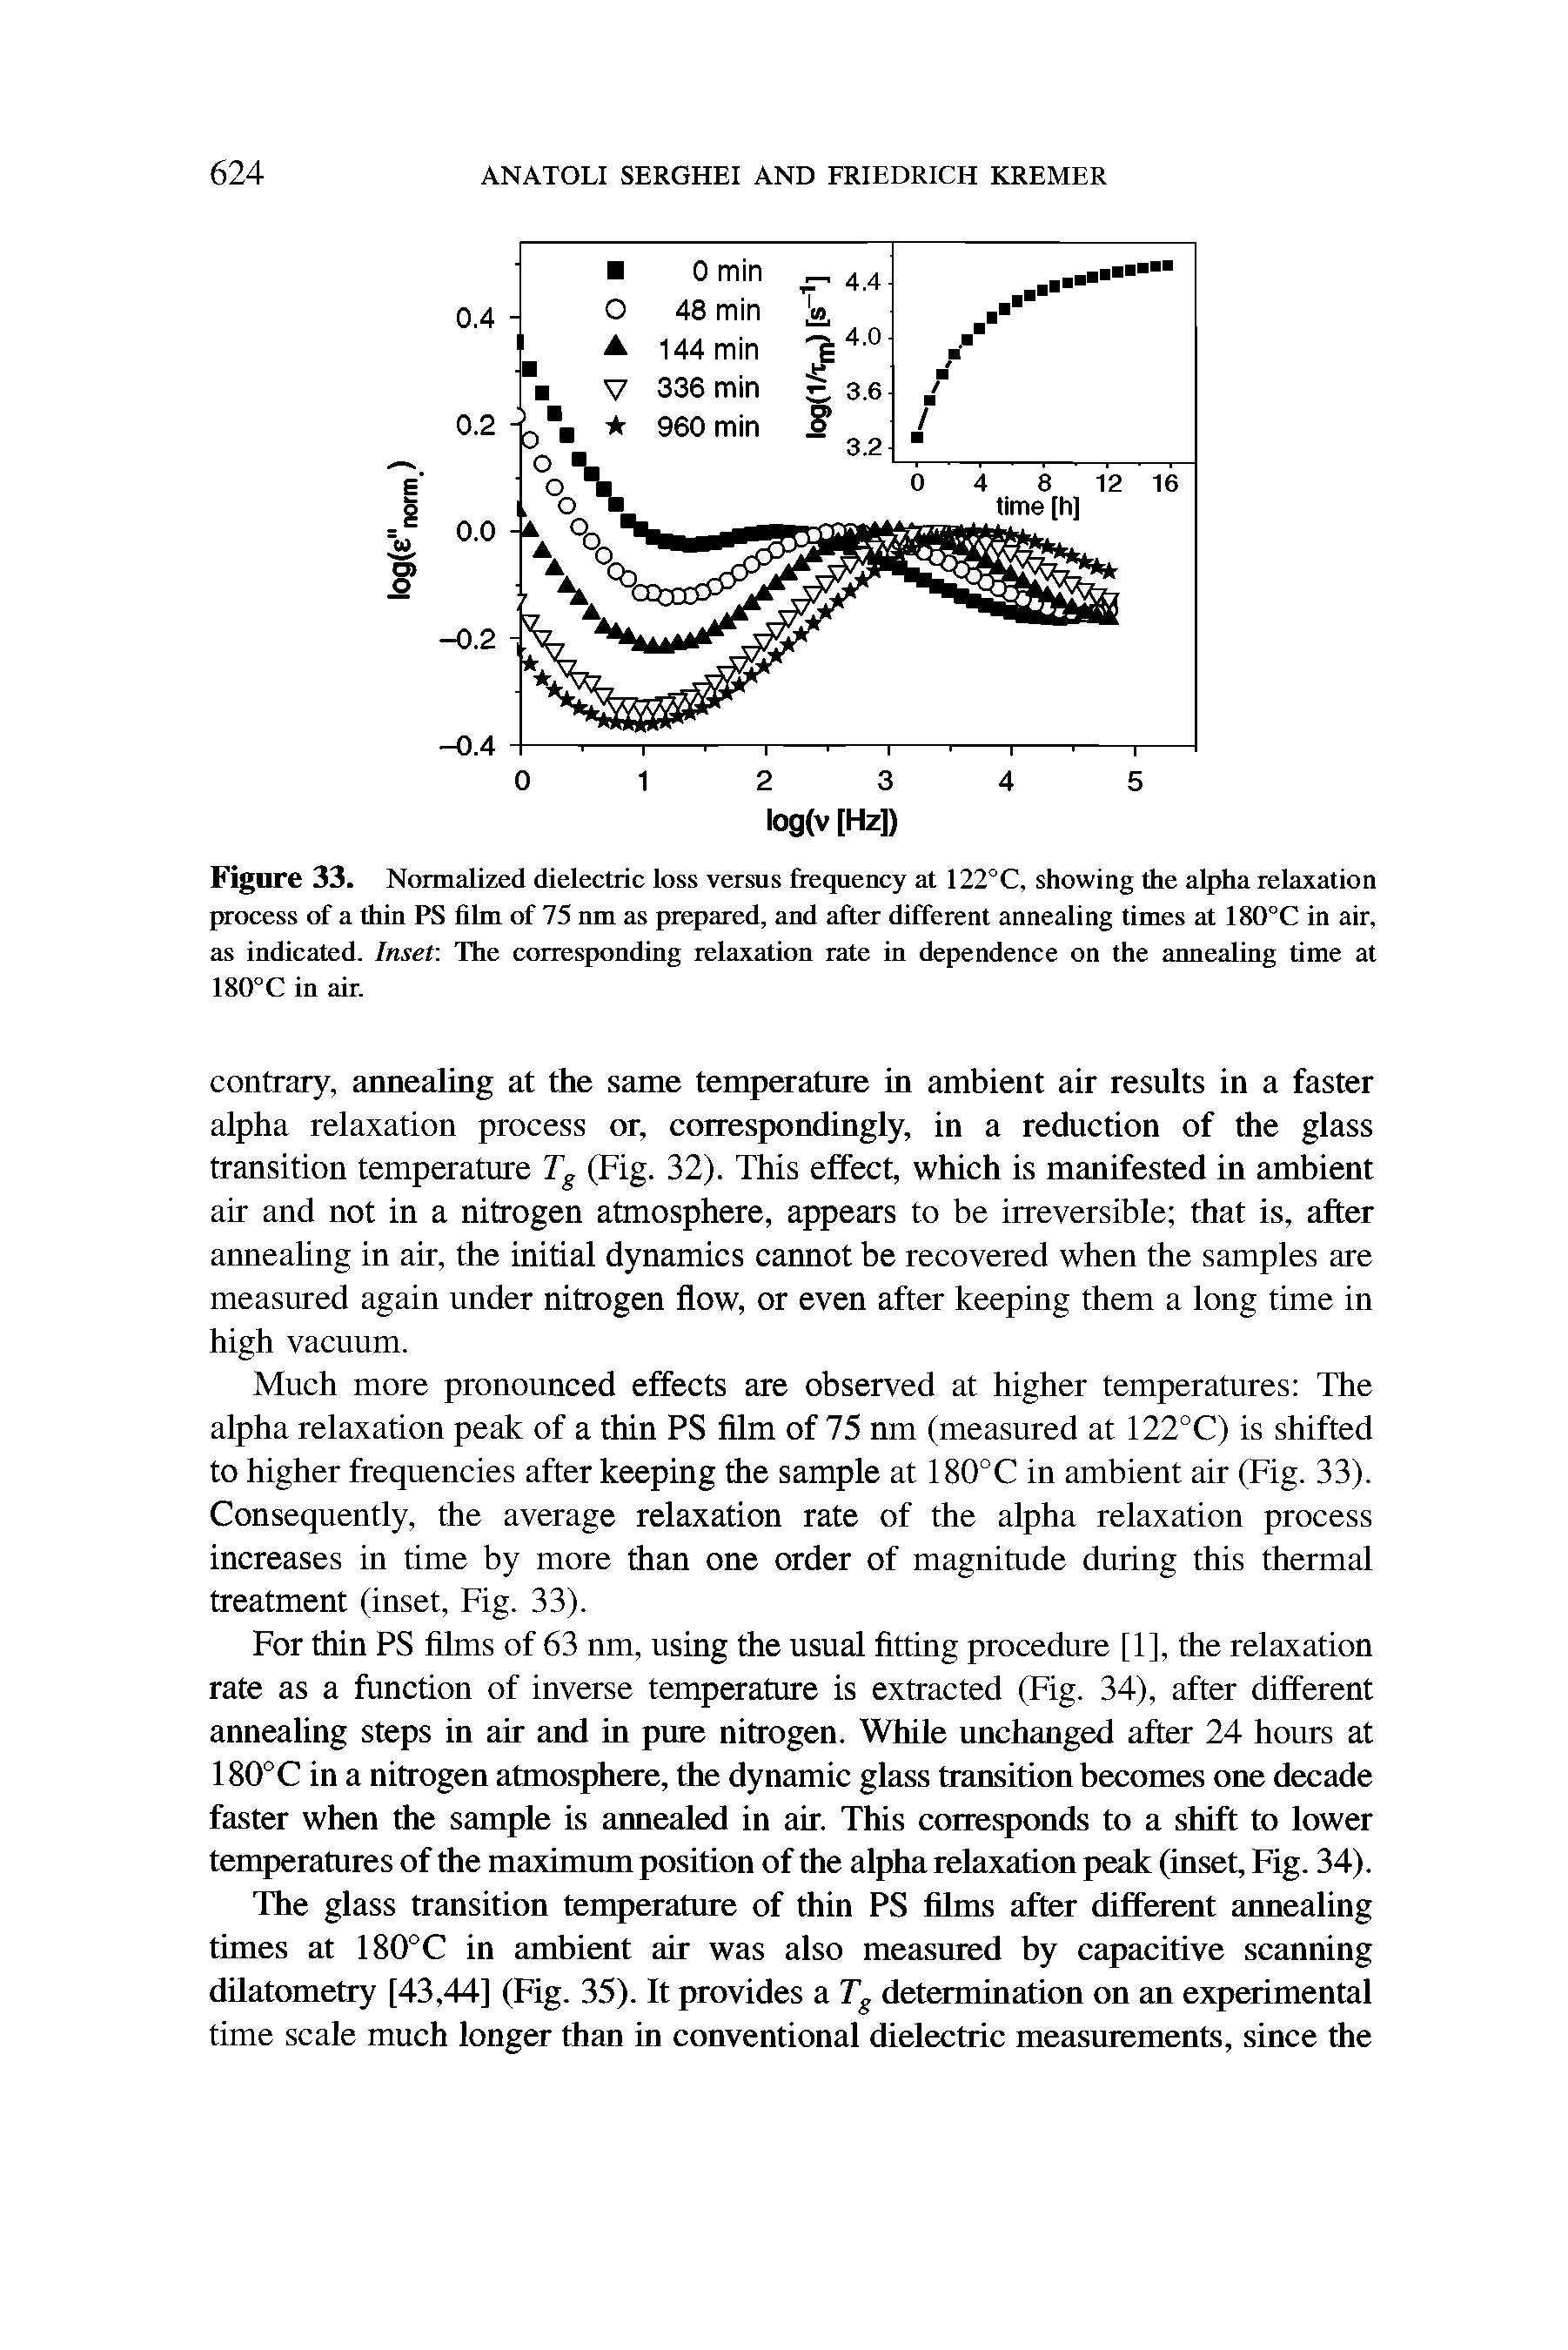 Figure 33. Normalized dielectric loss versus frequency at 122°C, showing the alpha relaxation process of a thin PS film of 75 nm as prepared, and after different annealing times at 180°C in air, as indicated. Inset. The corresponding relaxation rate in dependence on the annealing time at 180°C in air.